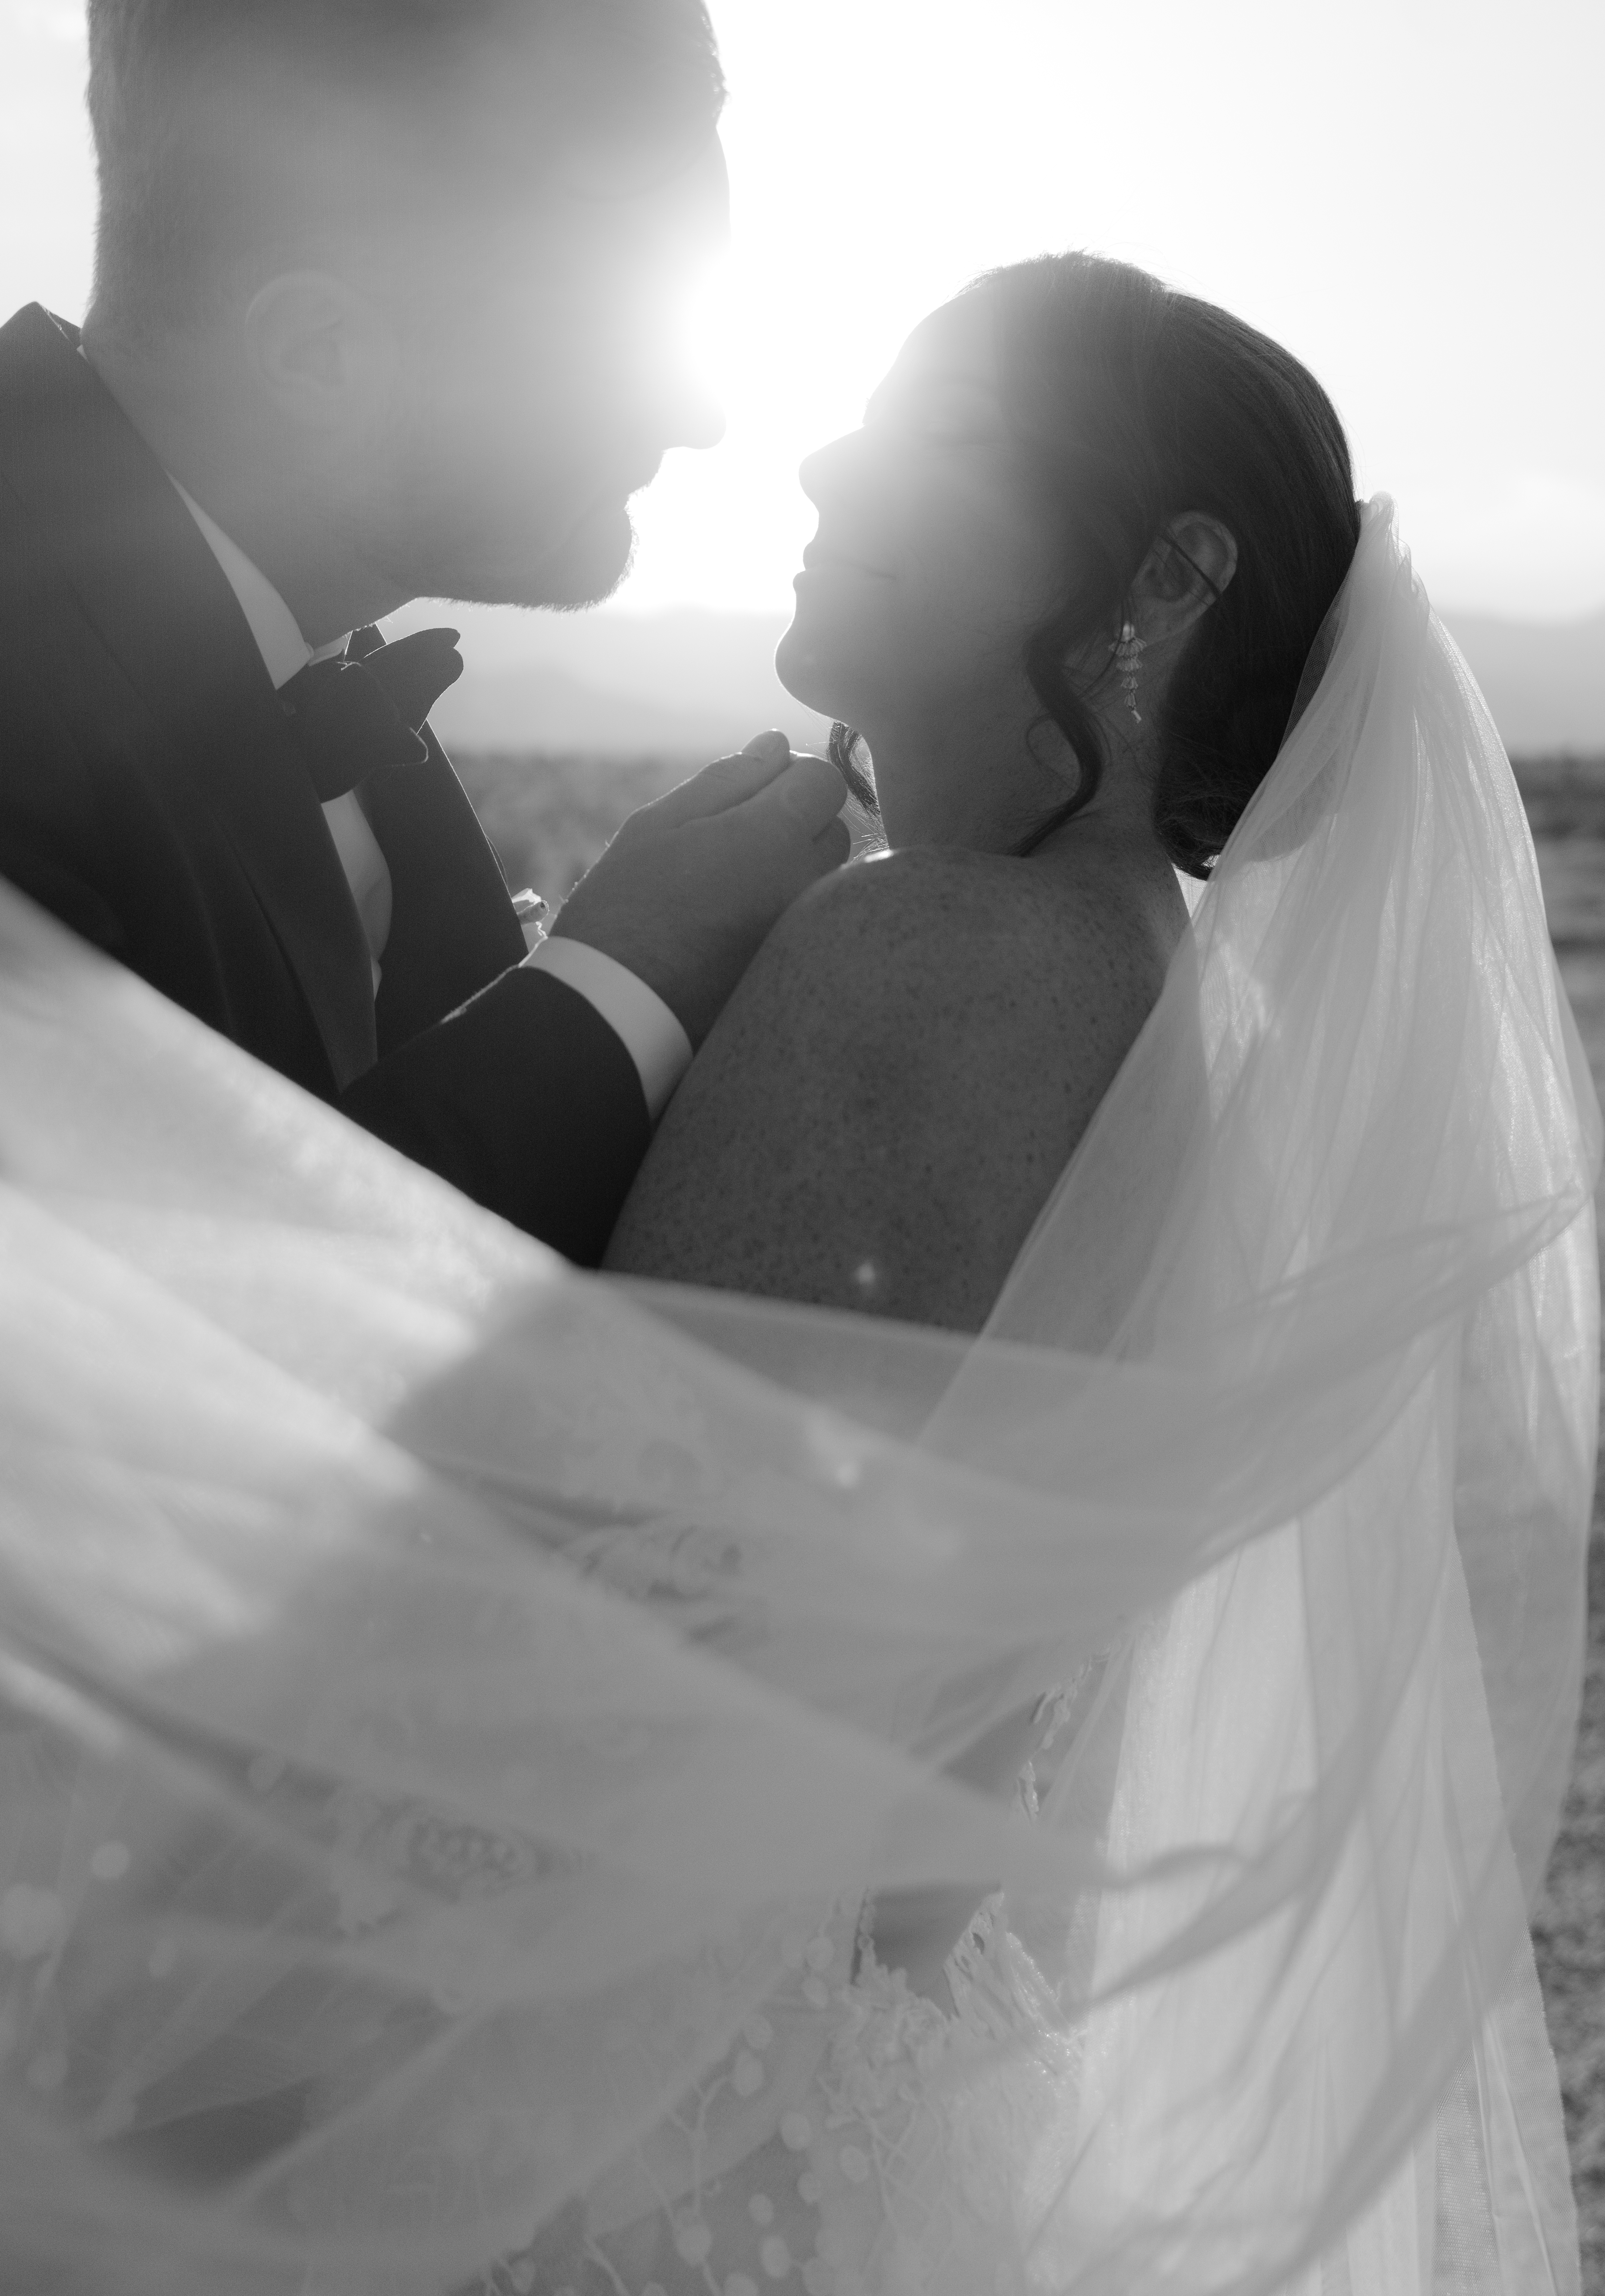 A newlywed couple looks at one another while the sun sets in the background and the brides veil blows in the wind